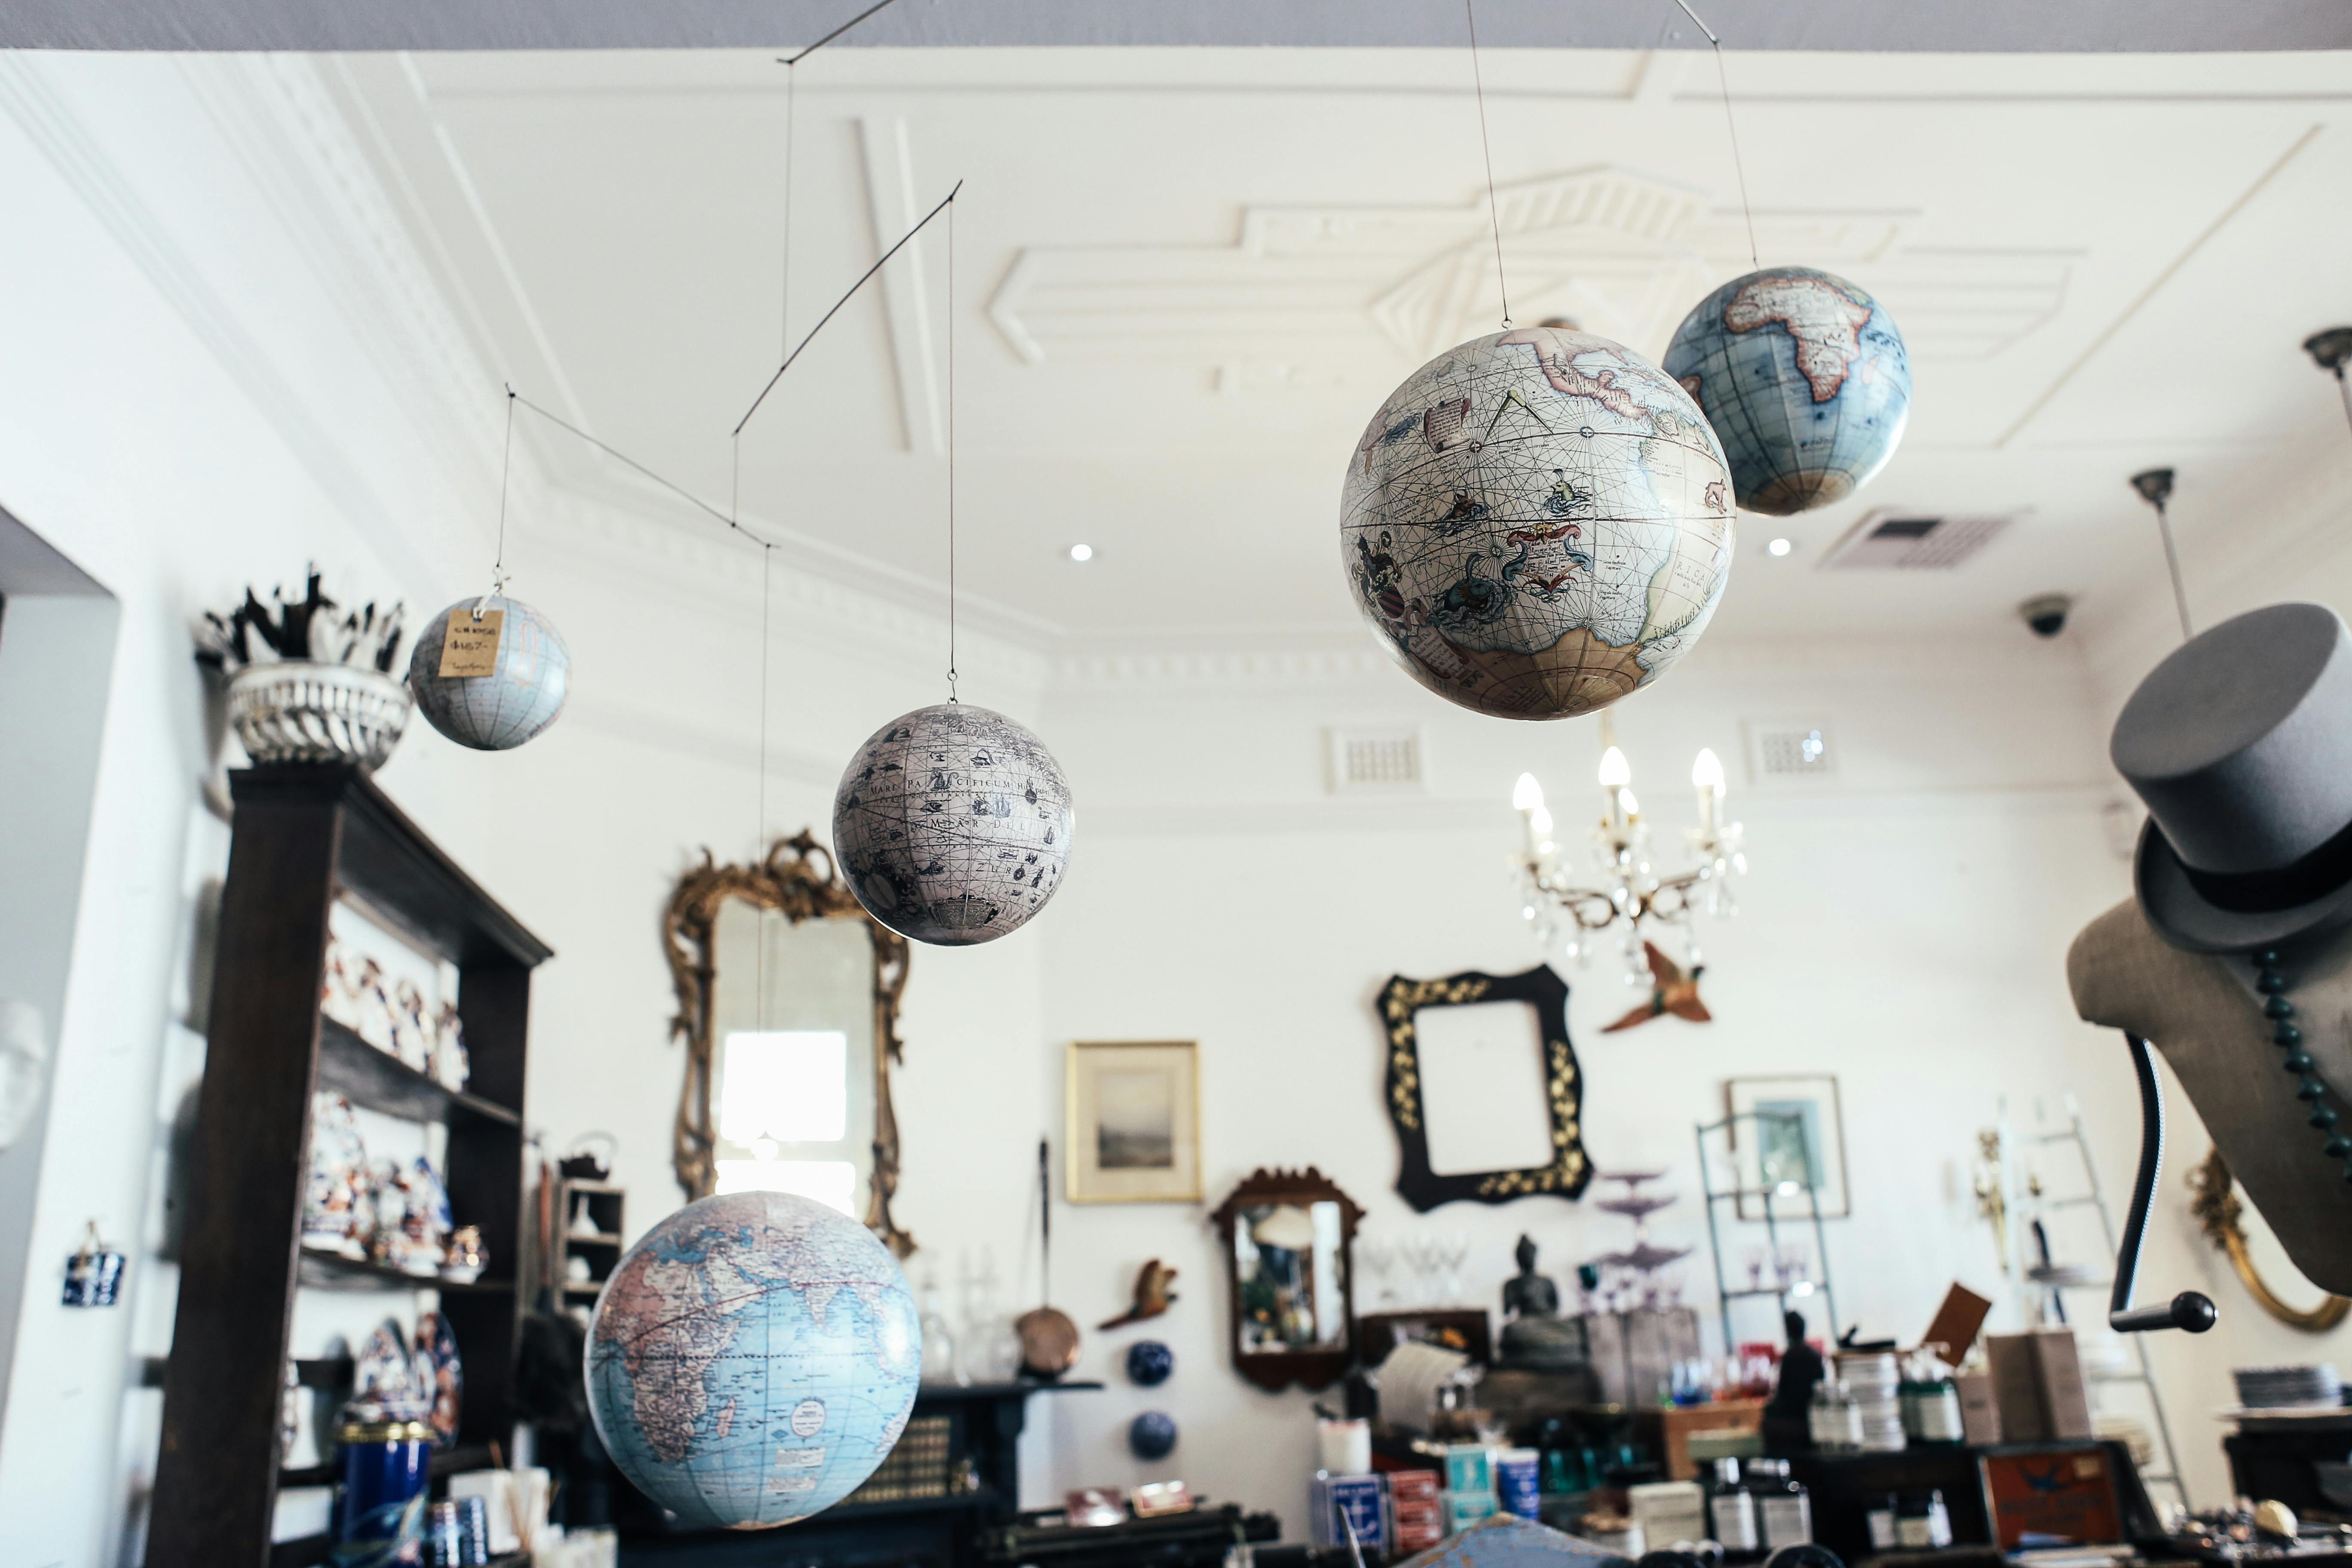 A room with globes and other knick knacks | Source: Pexels